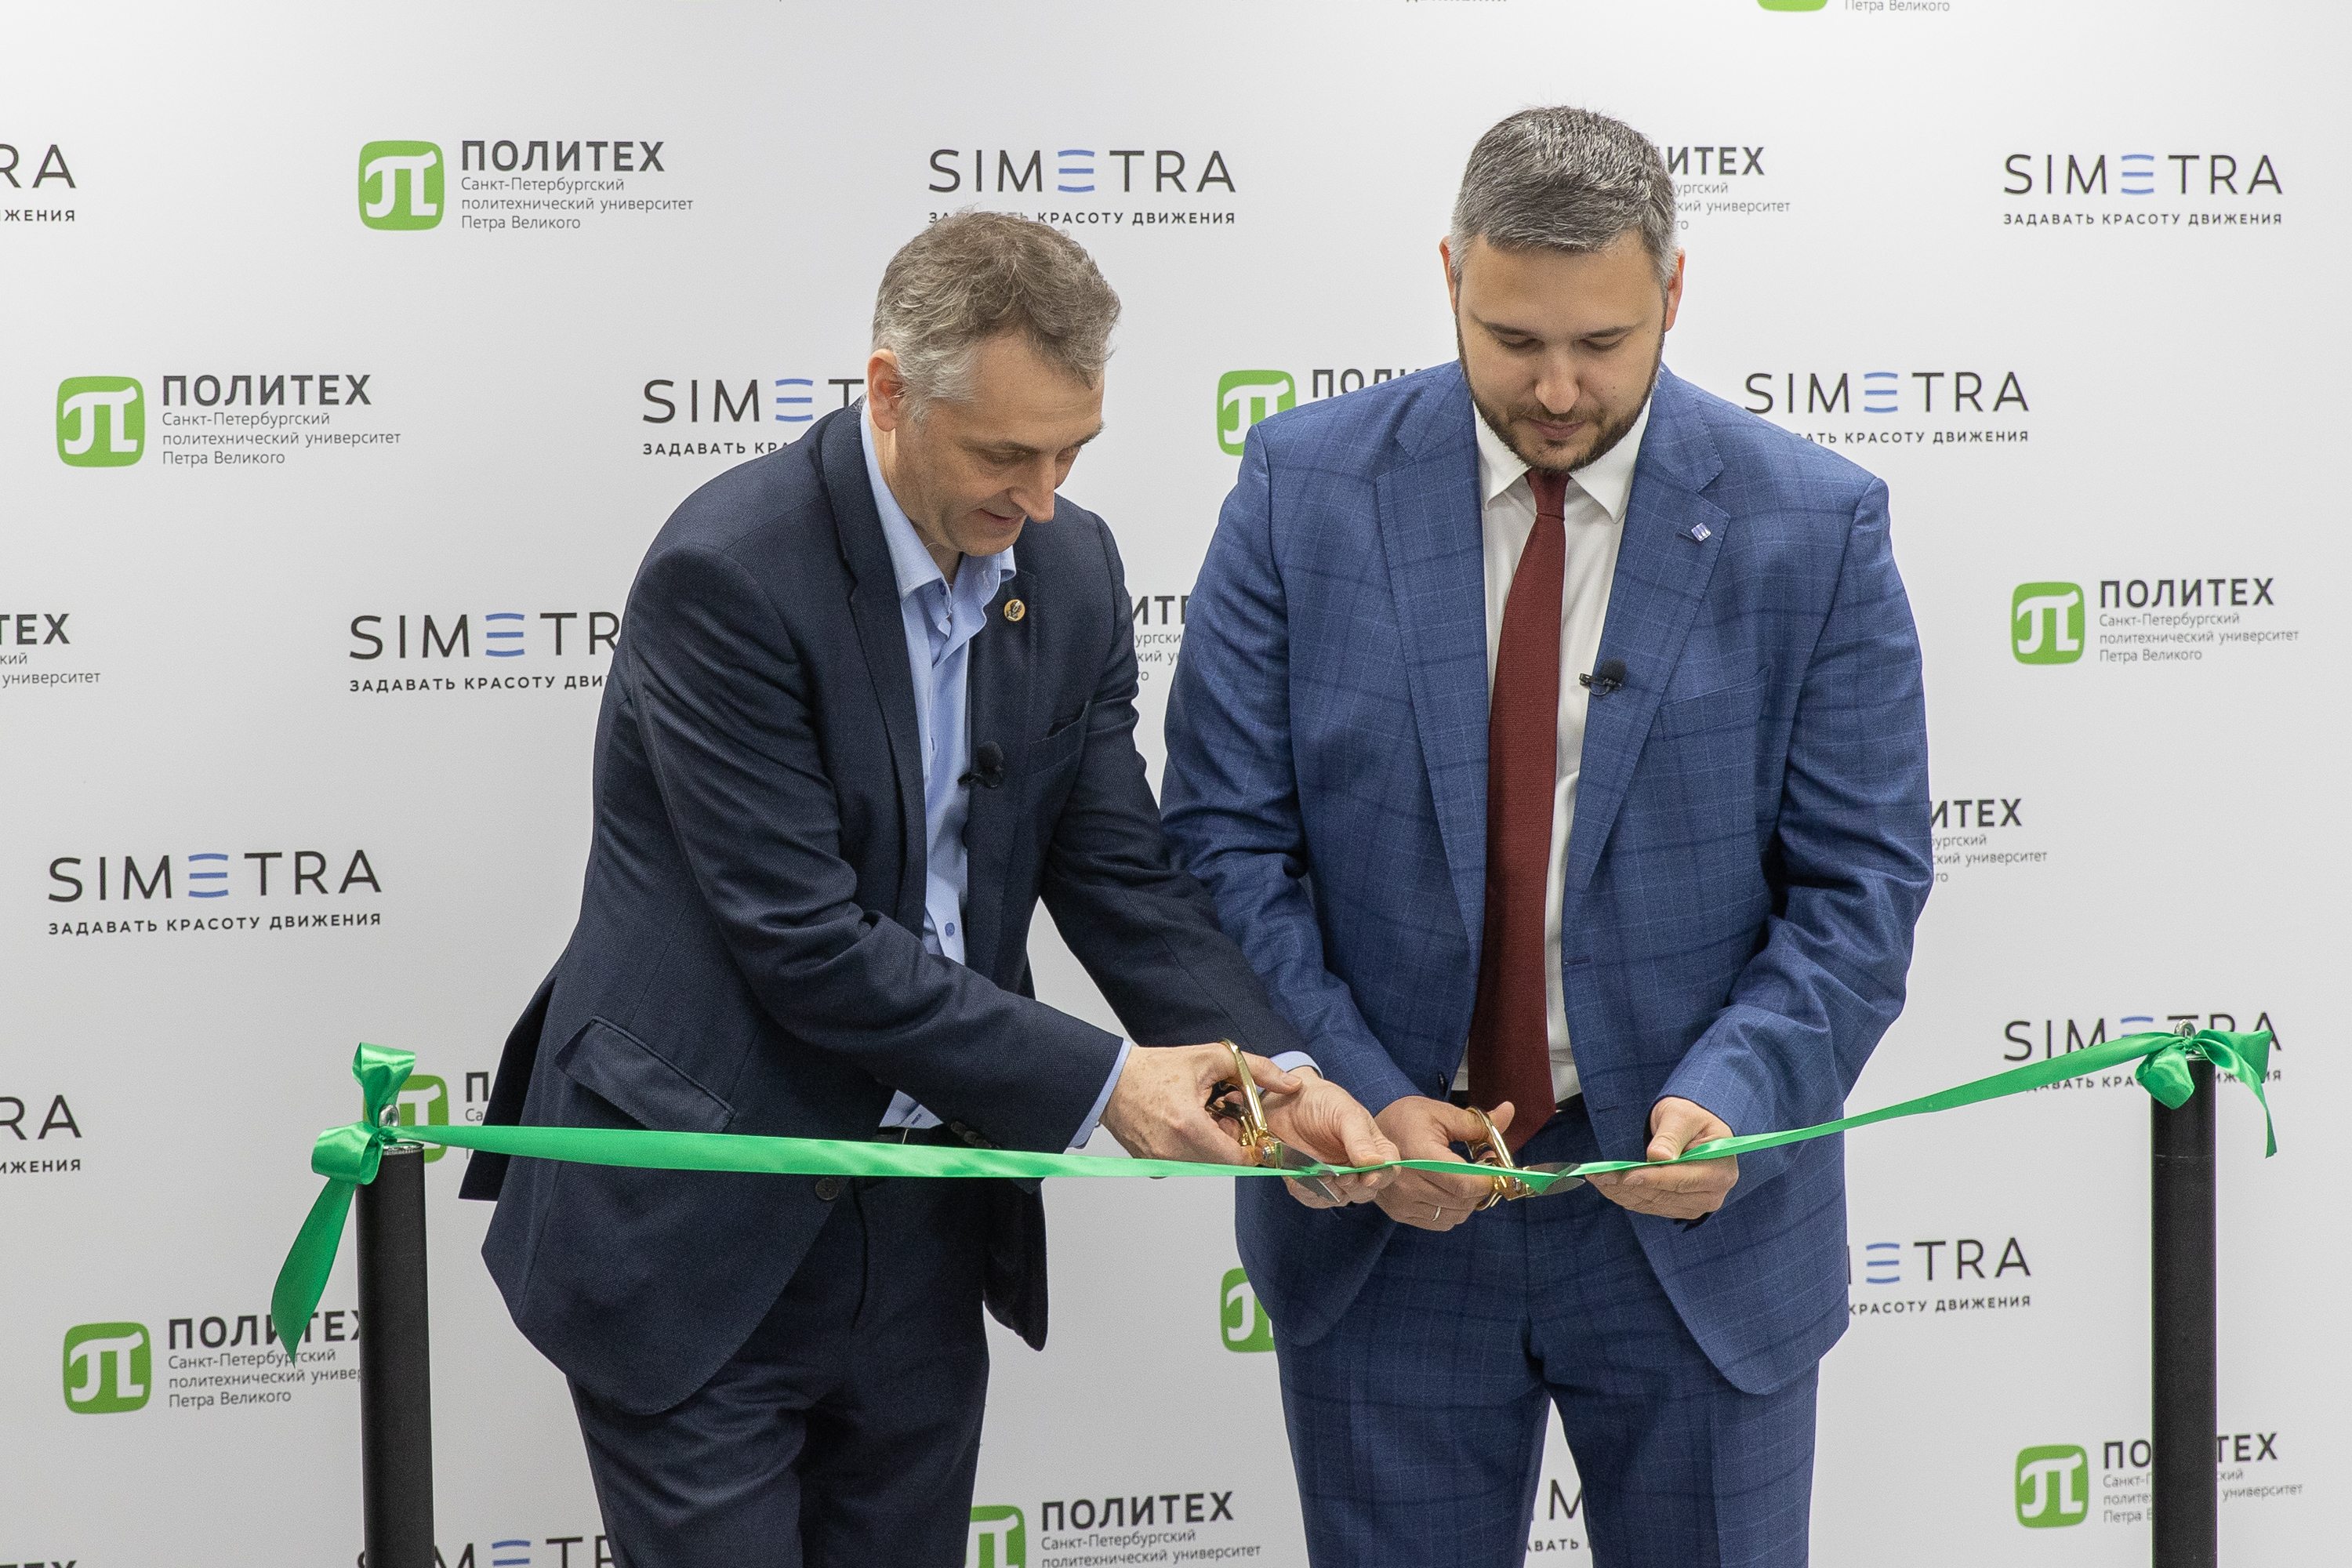 SIMETRA and Polytechnic University have opened a joint scientific Laboratory of Intelligent Transport Systems